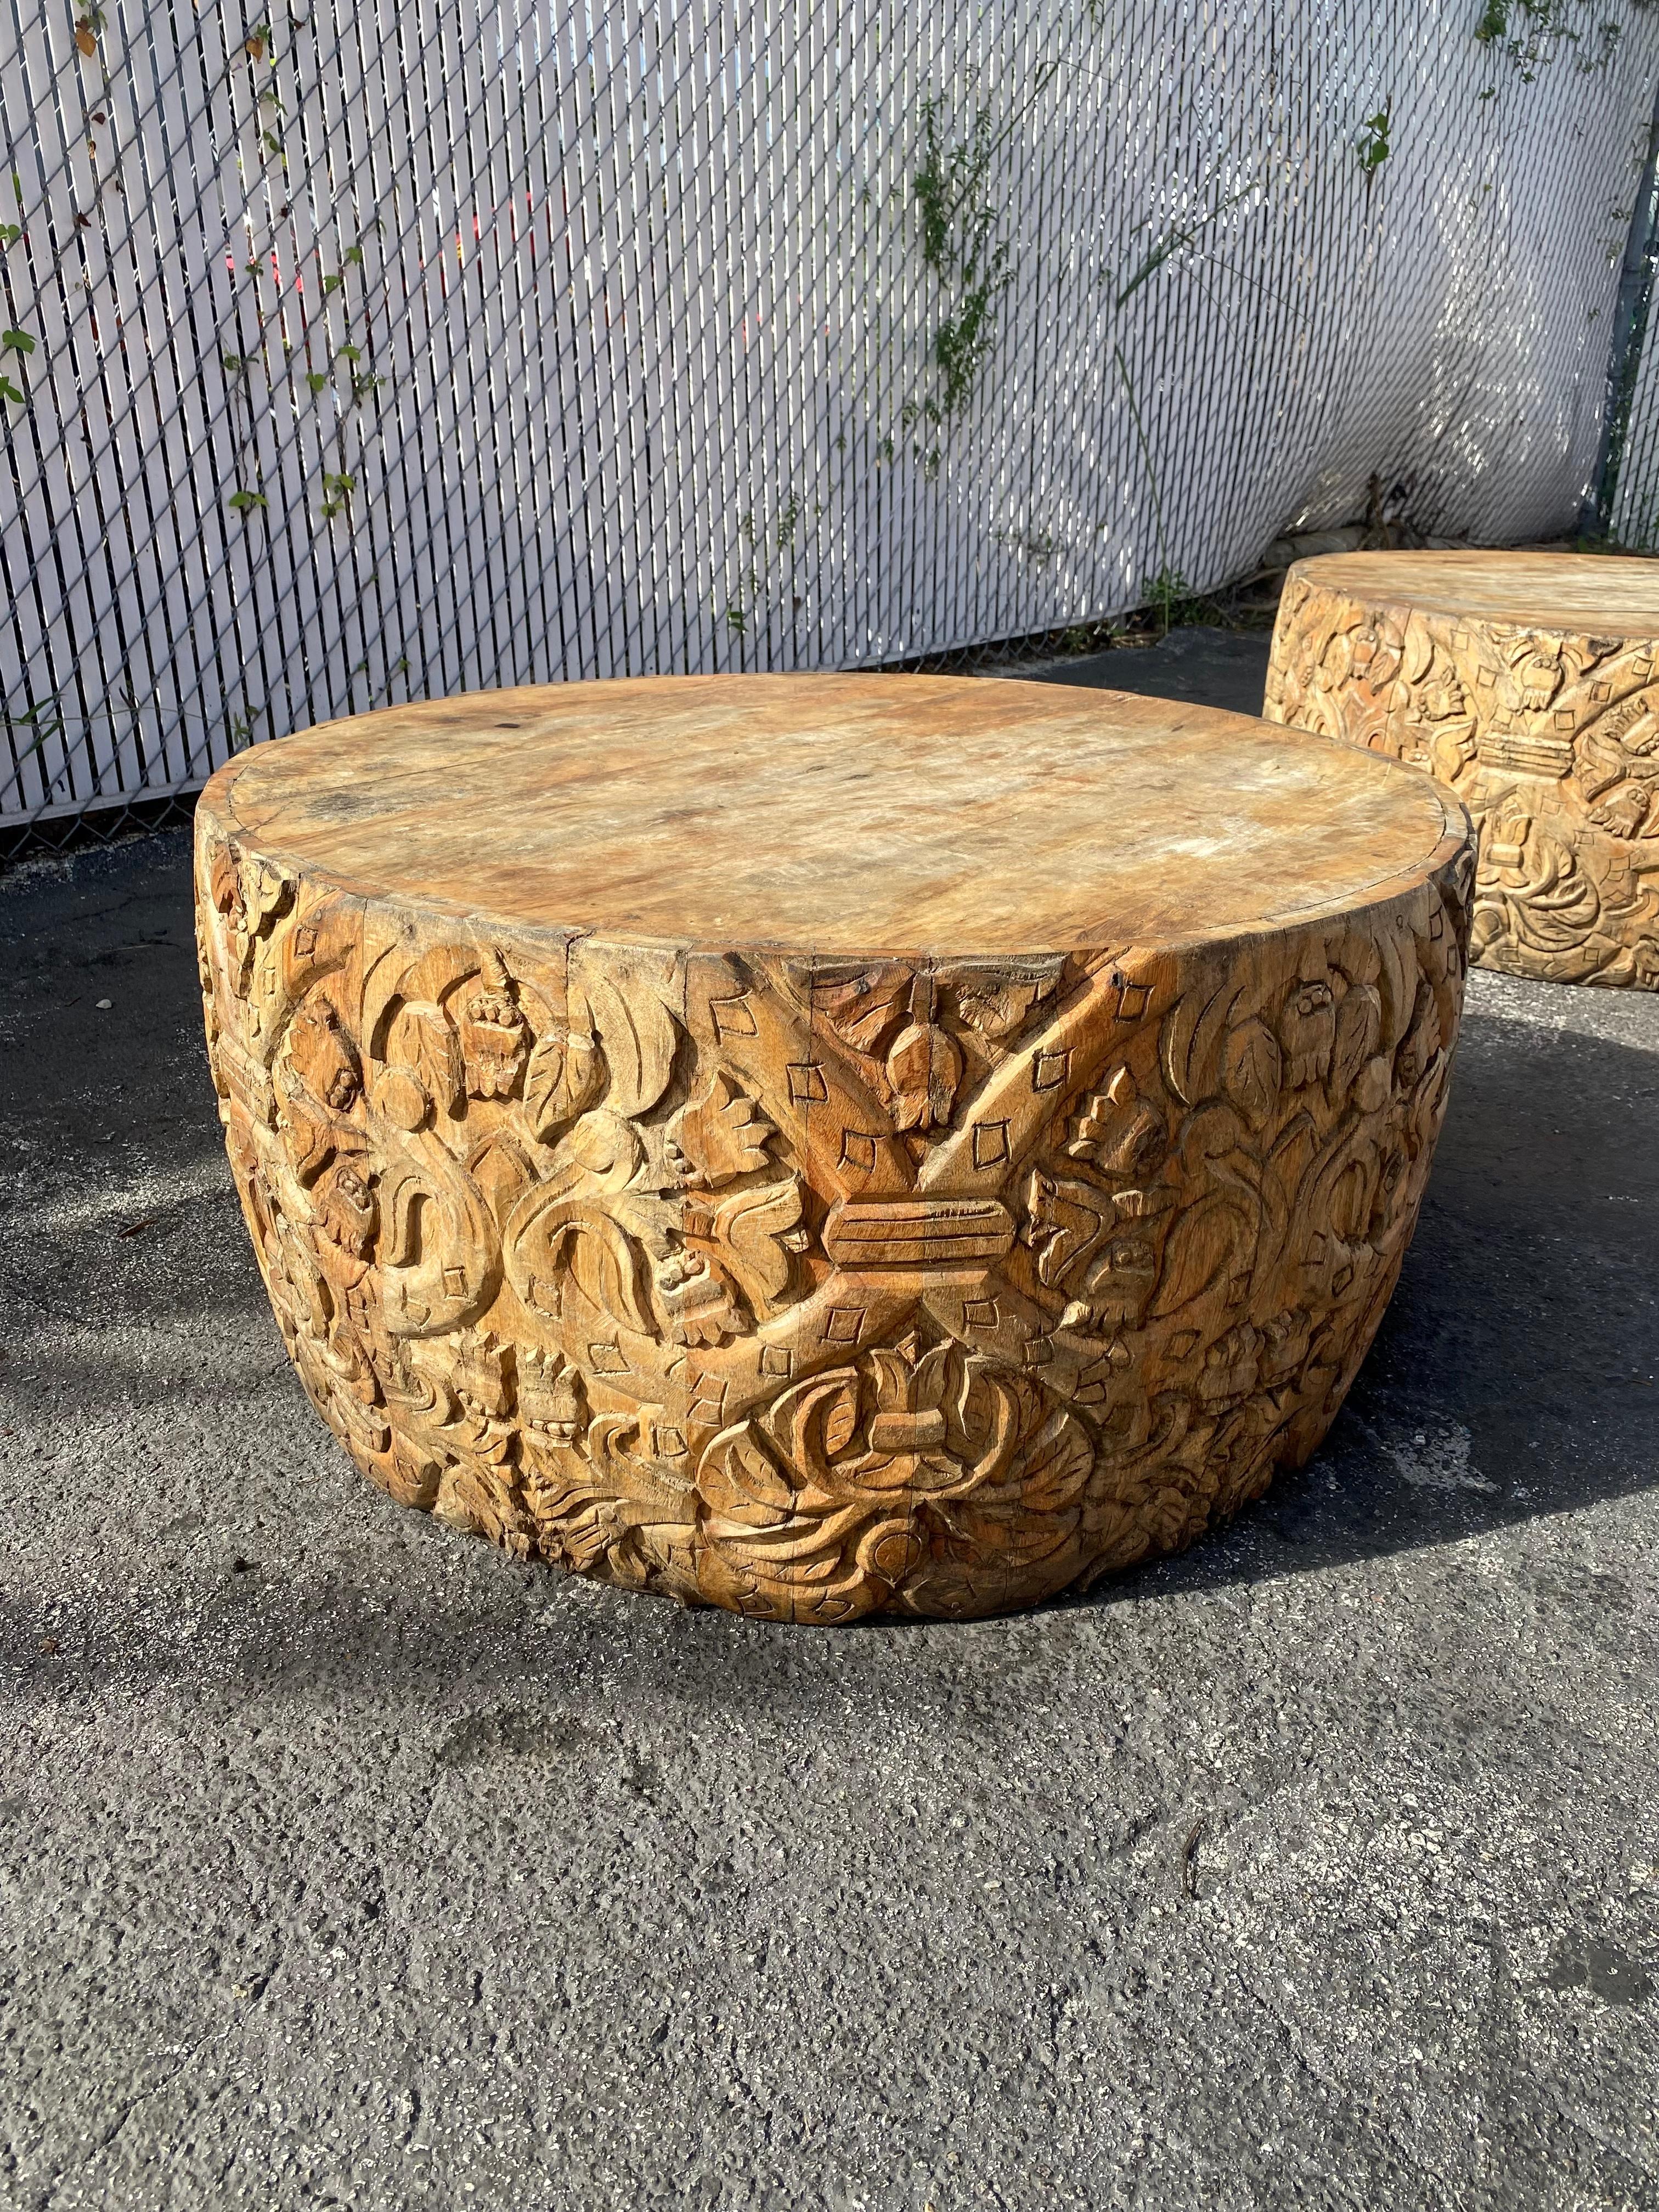 1940s Heavily Carved Teak Gilt Wood Round Drum Coffee Tables, Set of 2 For Sale 8